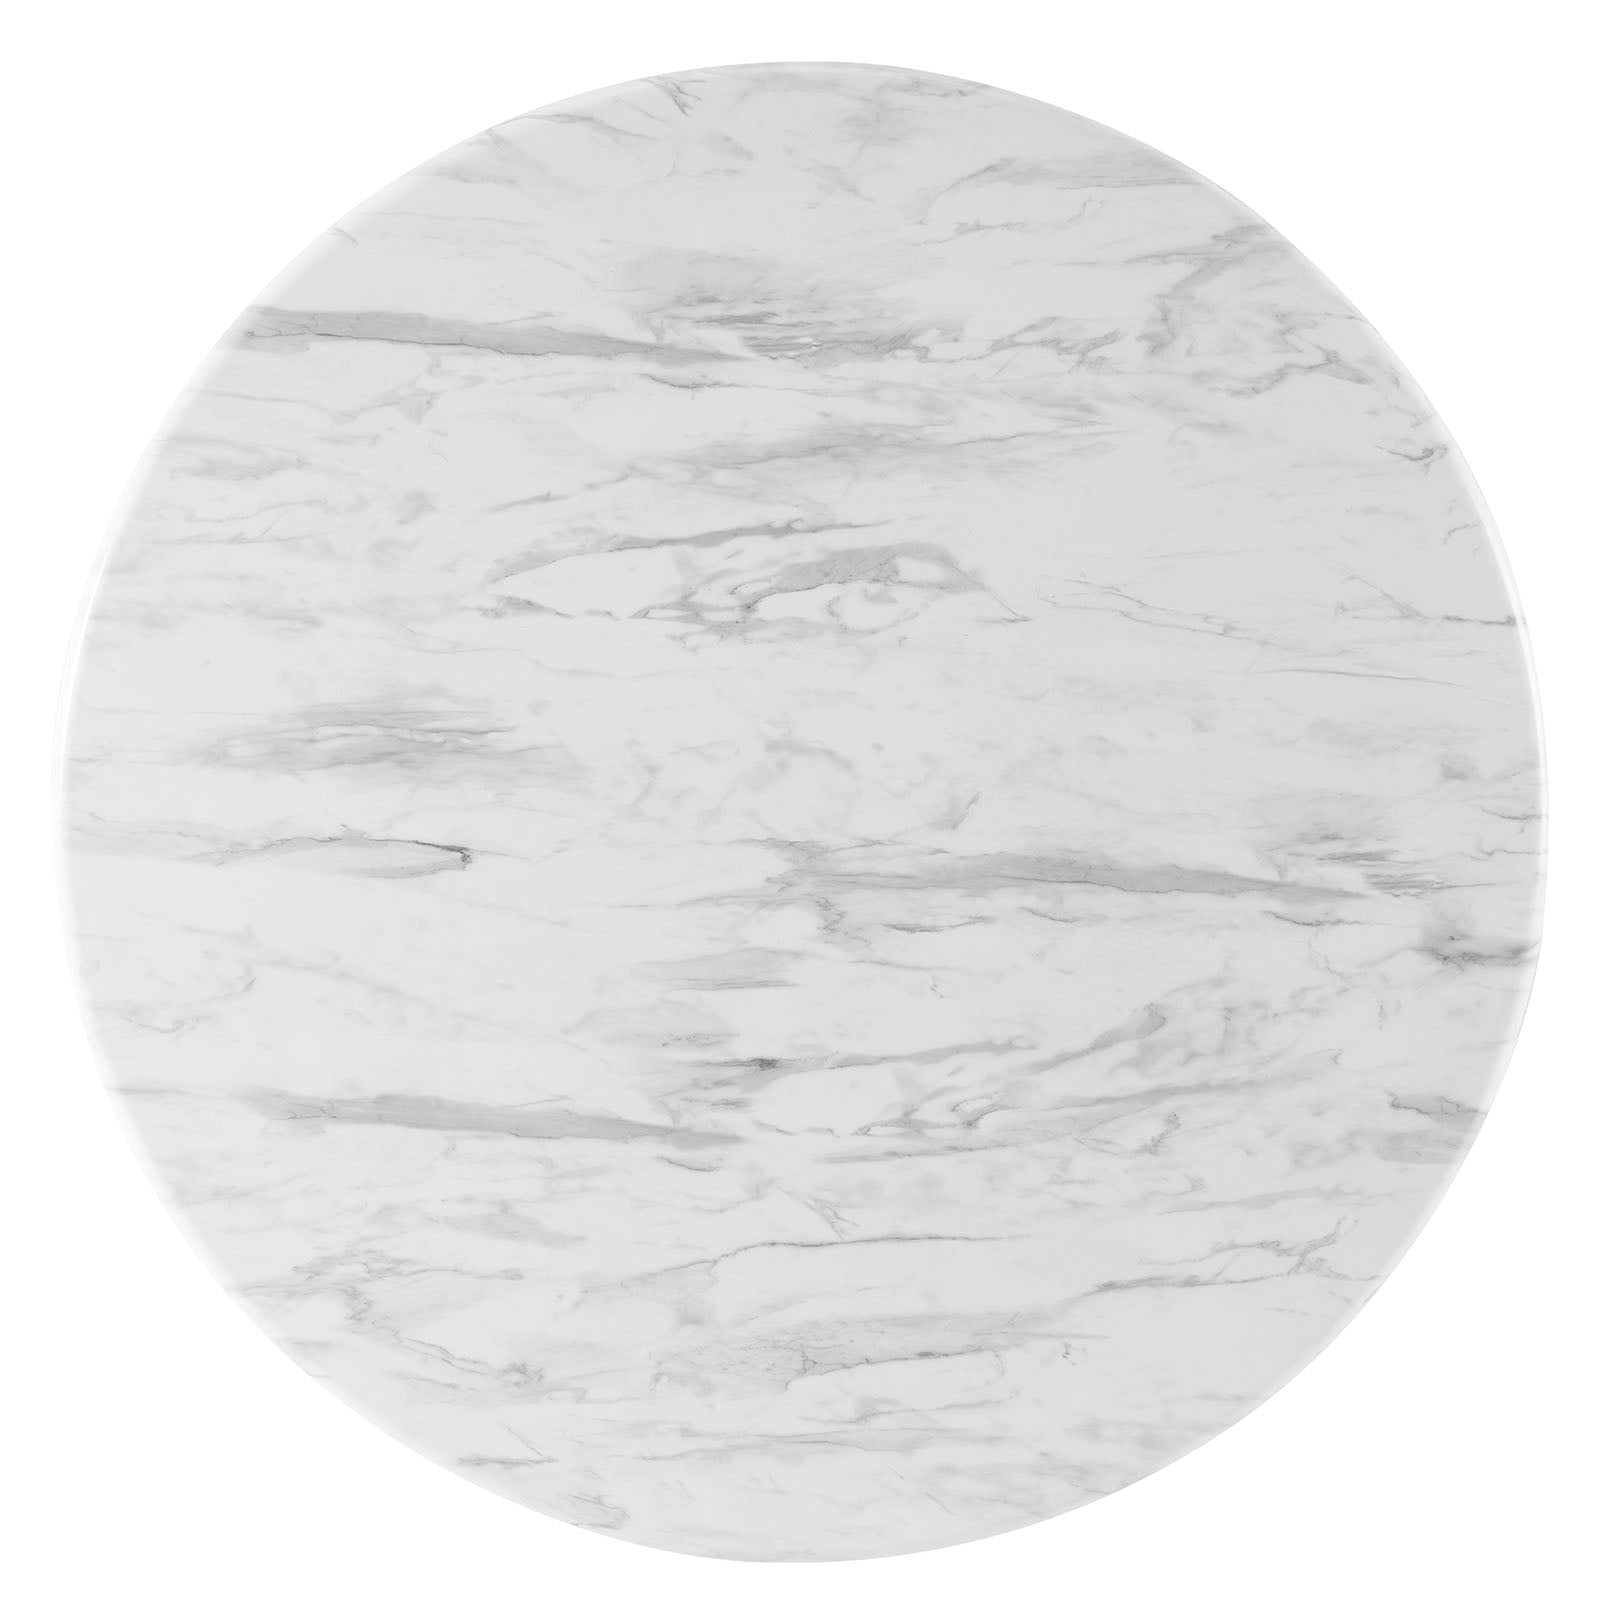 Traverse 50" Round Performance Artificial Marble Dining Table